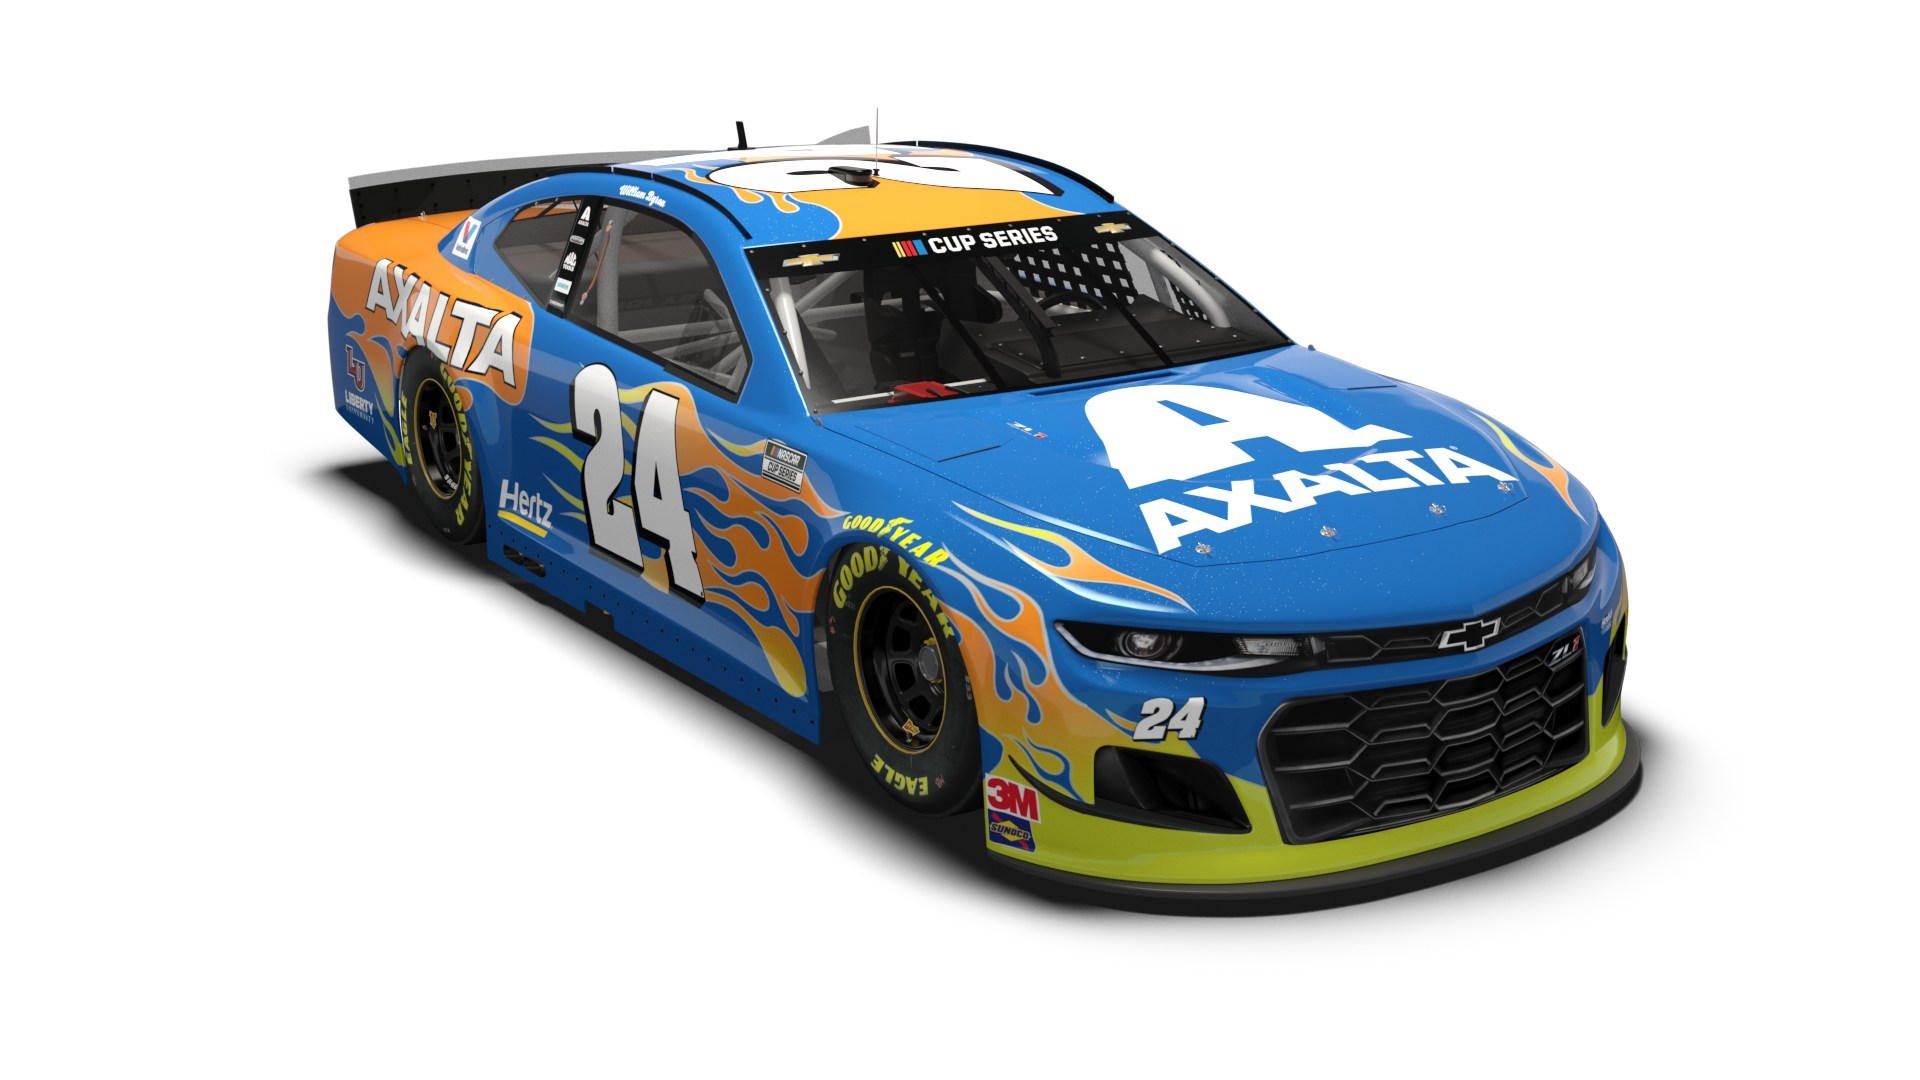 Axalta Automotive Color of the Year to Appear in Daytona 500 | THE SHOP